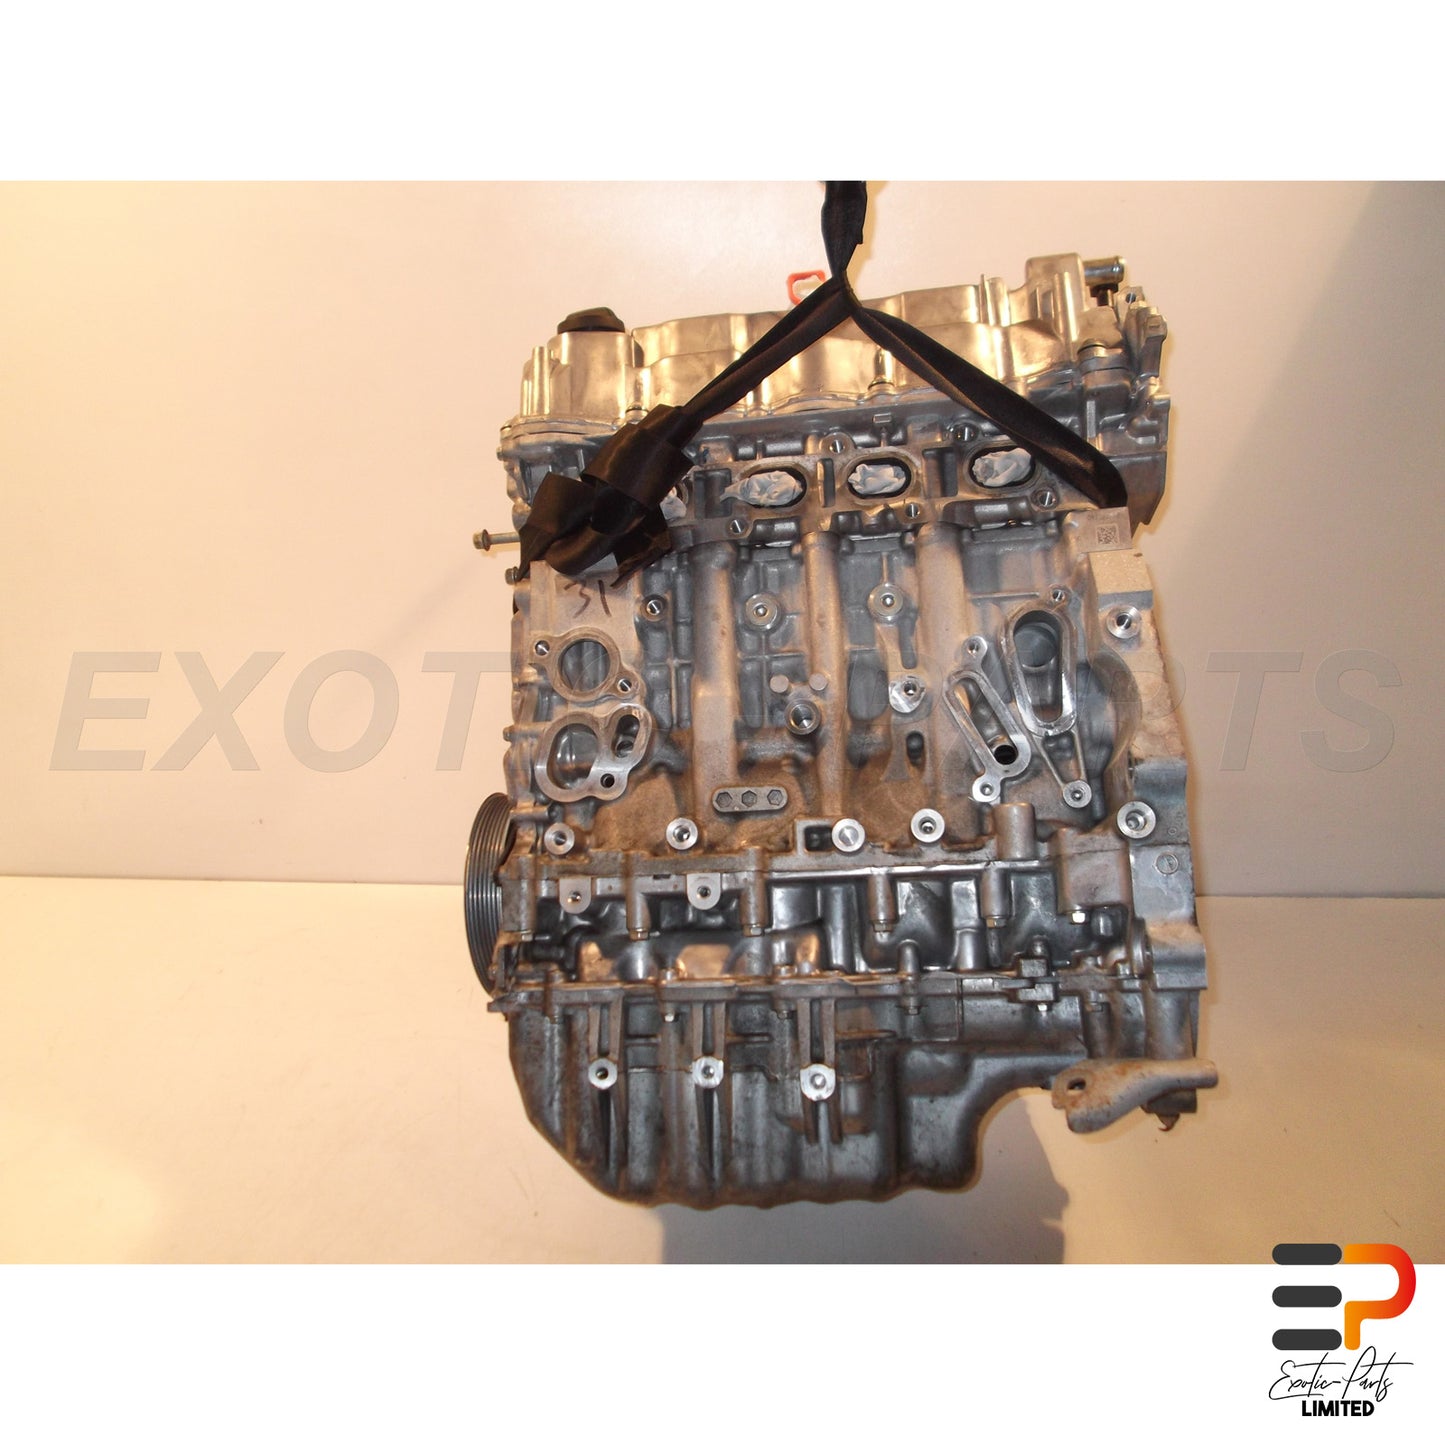 Honda CR-V 2.2 i-DTEC Engine | In mint condition (11395 KM) 11000-rl0-g00 picture 5